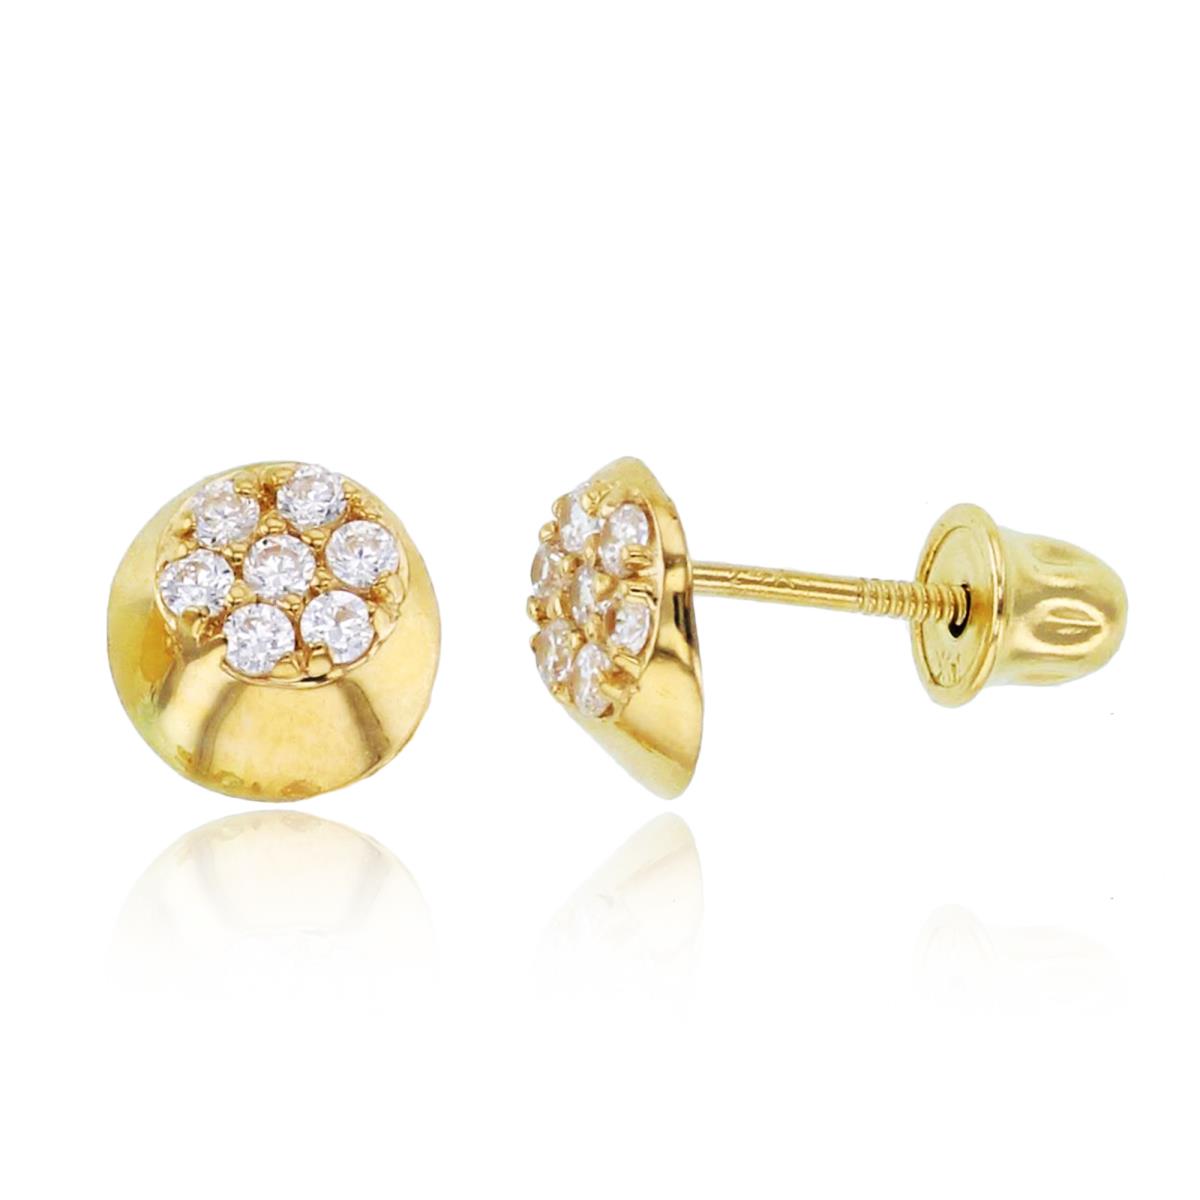 14K Yellow Gold 6x6mm Paved Circle & Polished Screwback Stud Earring